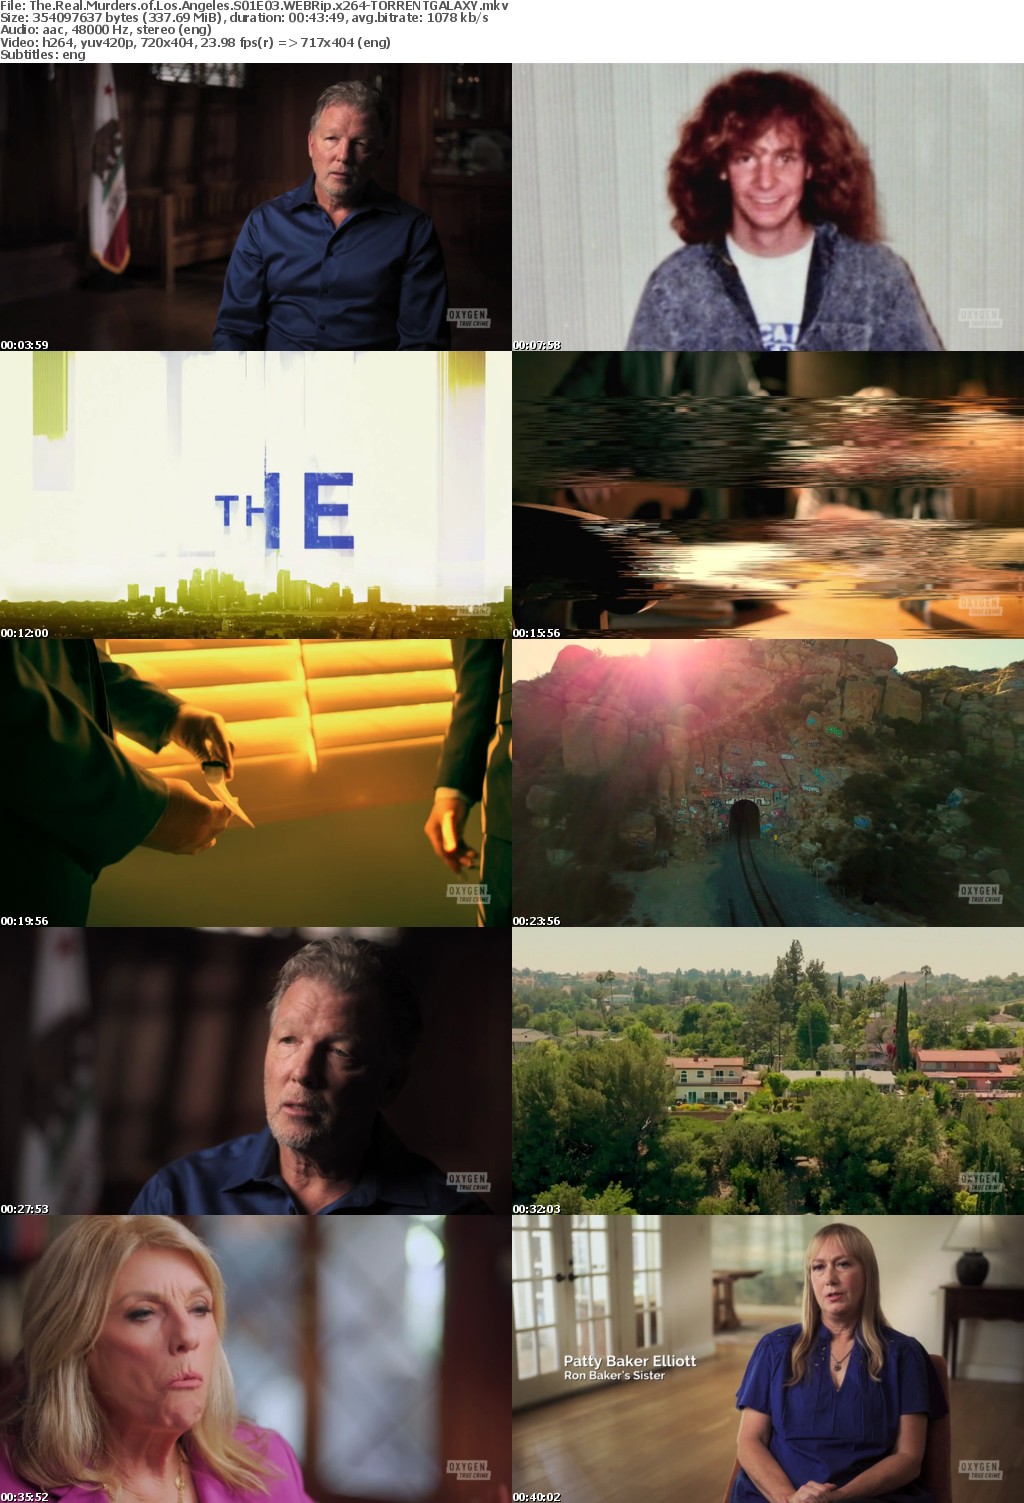 The Real Murders of Los Angeles S01E03 WEBRip x264-GALAXY